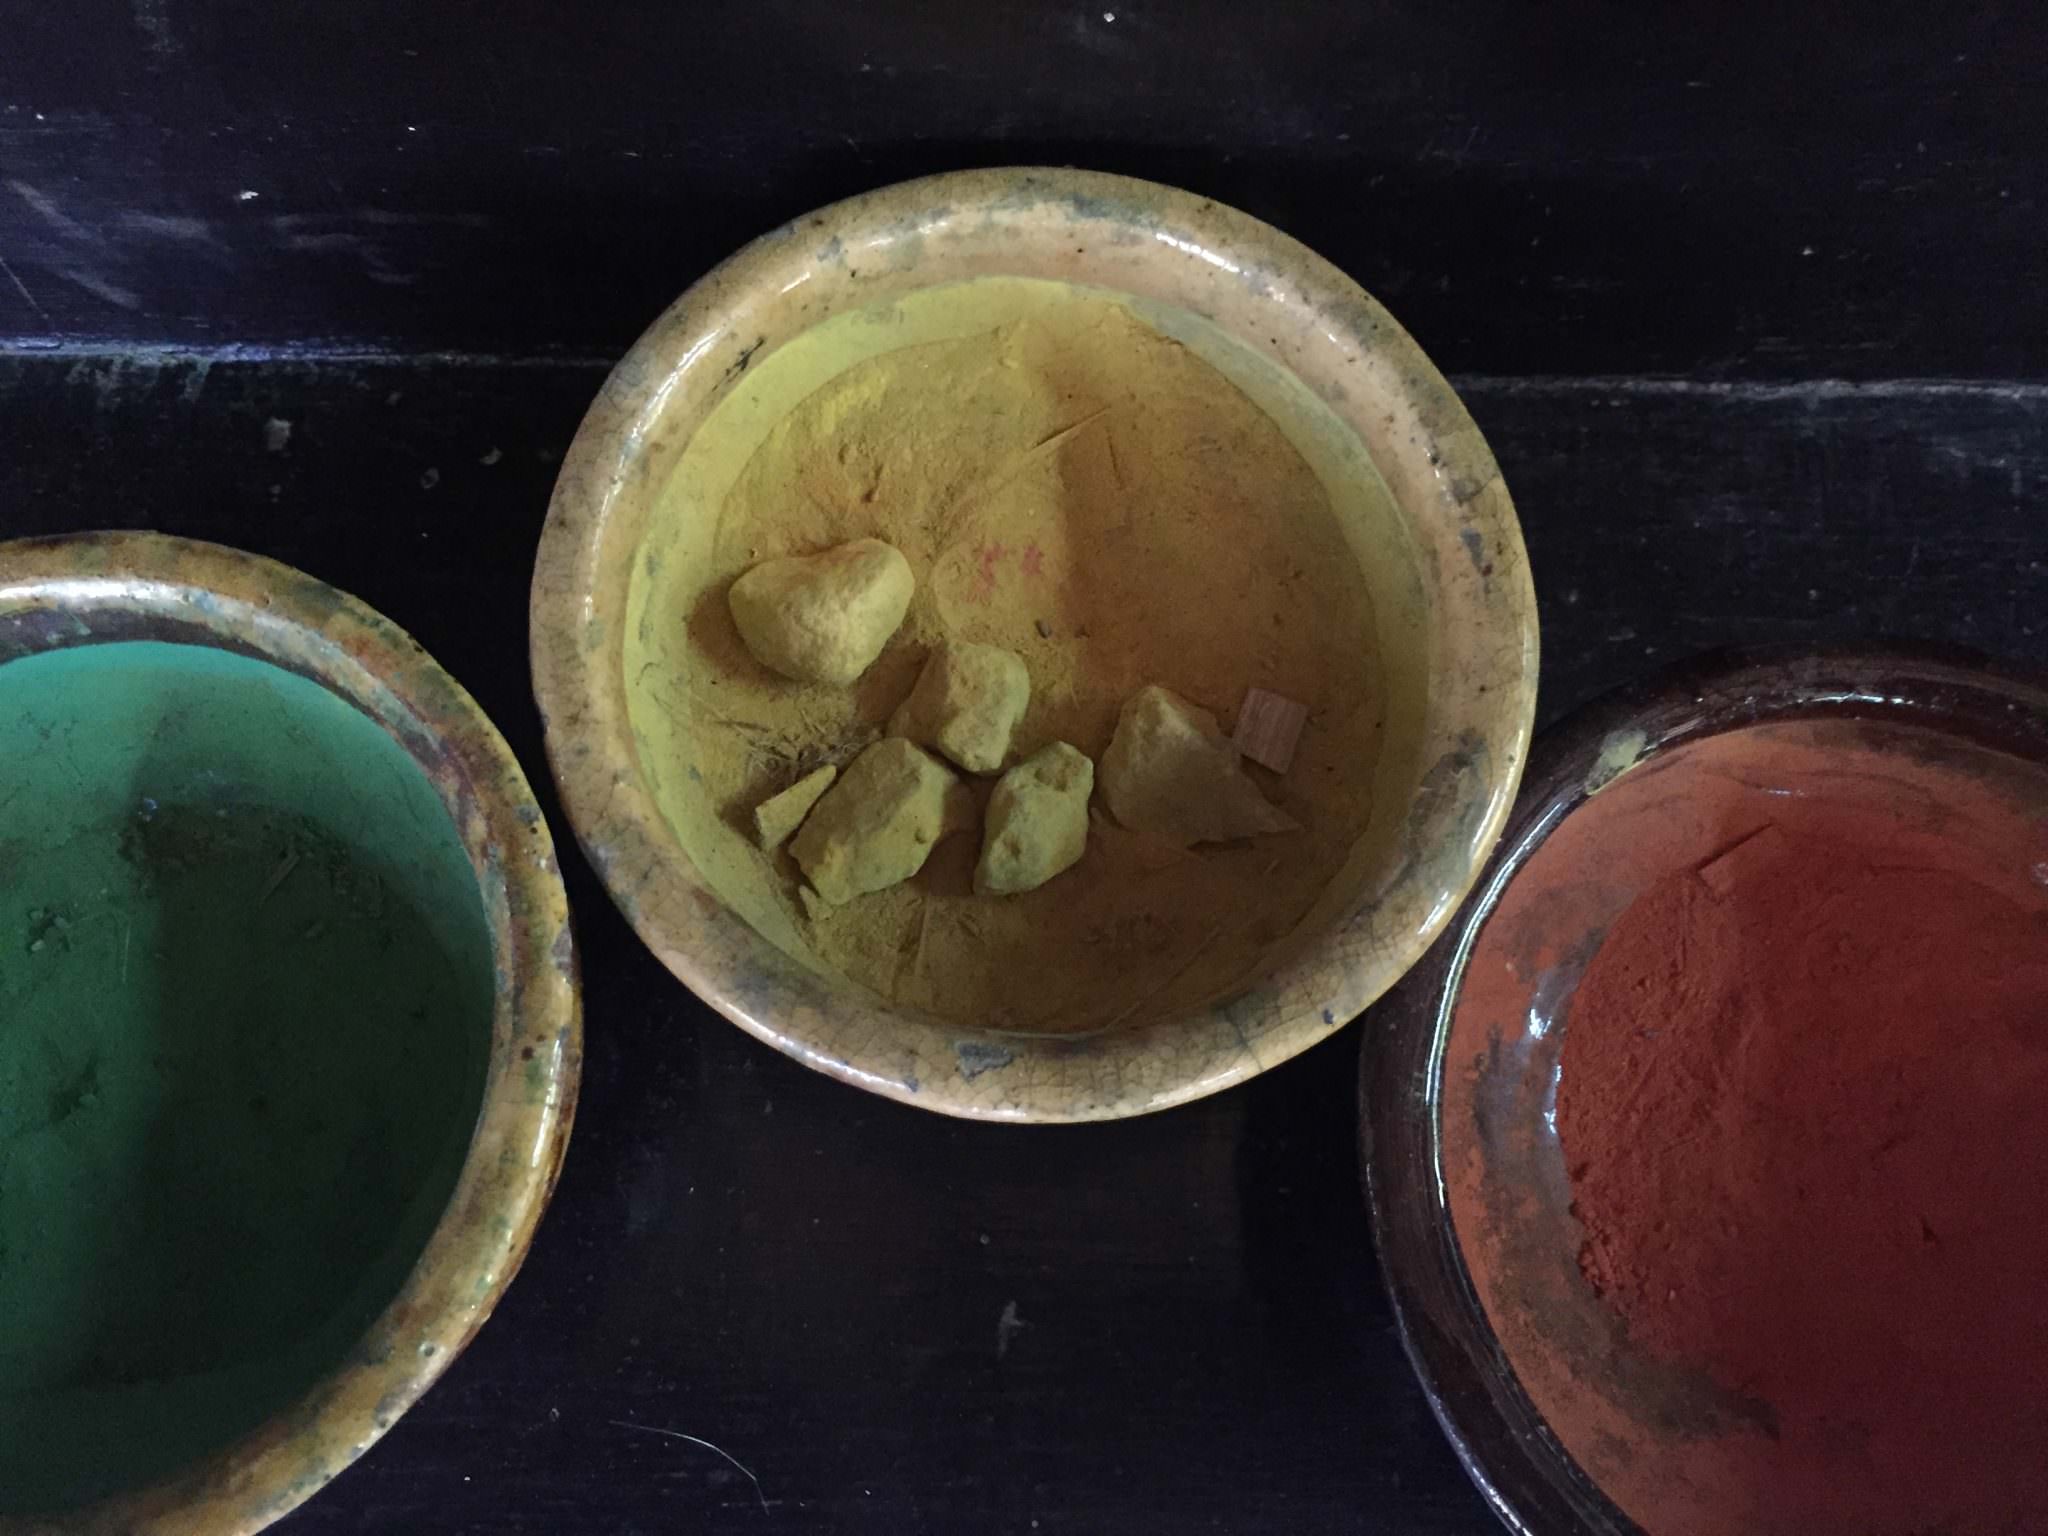 Different spices and ground plants + flowers are used to make the paint. © 2015 Gail Jessen